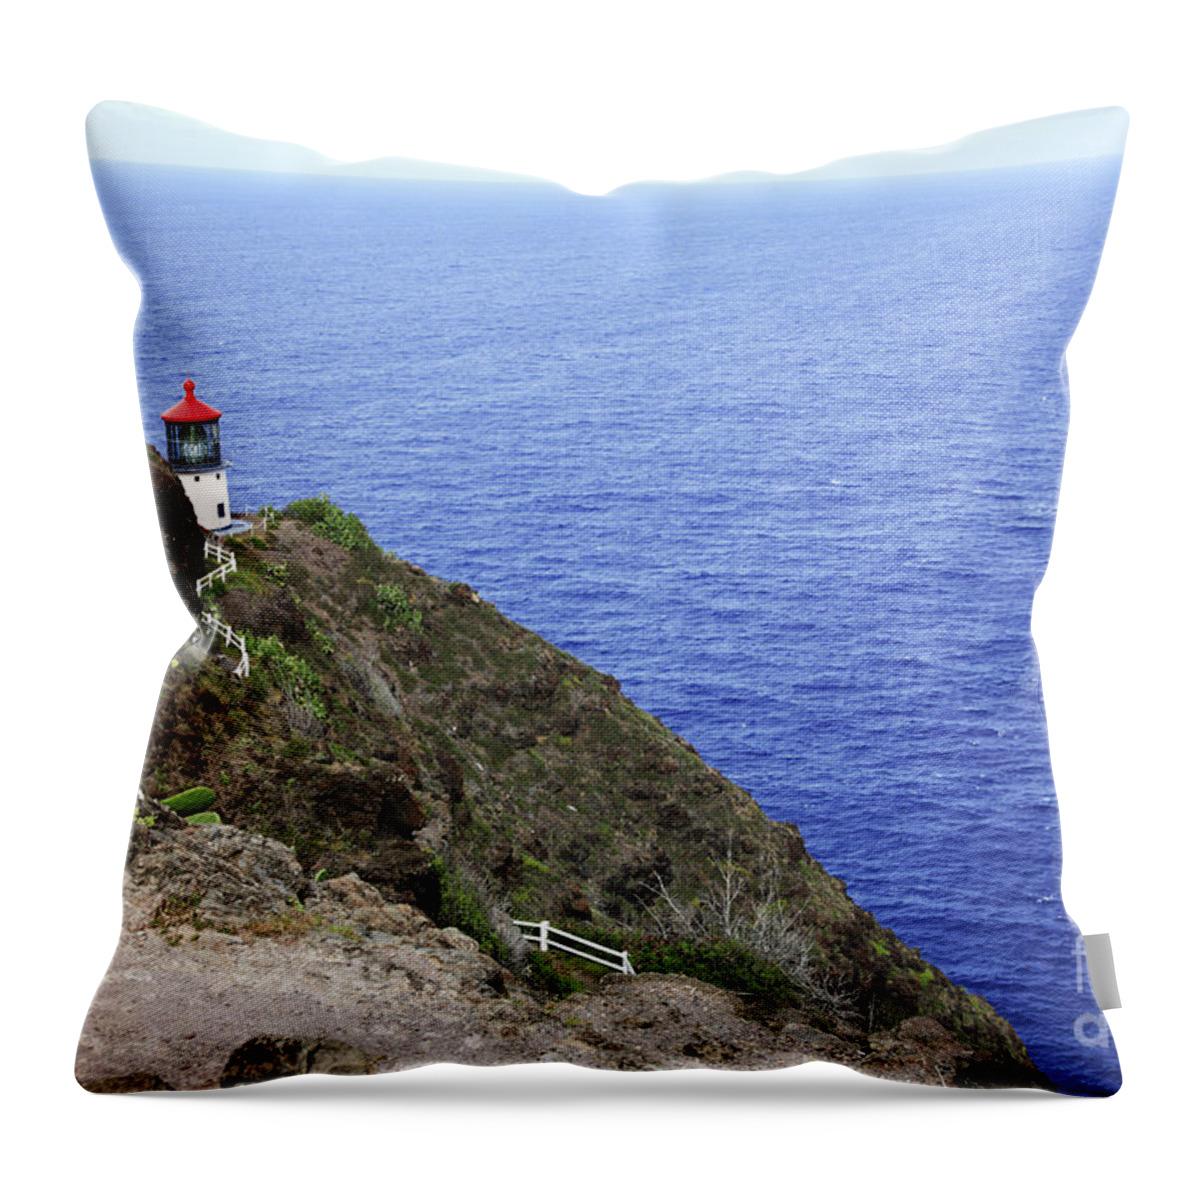 Activity Throw Pillow featuring the photograph Makapuu Lighthouse by Brandon Tabiolo - Printscapes